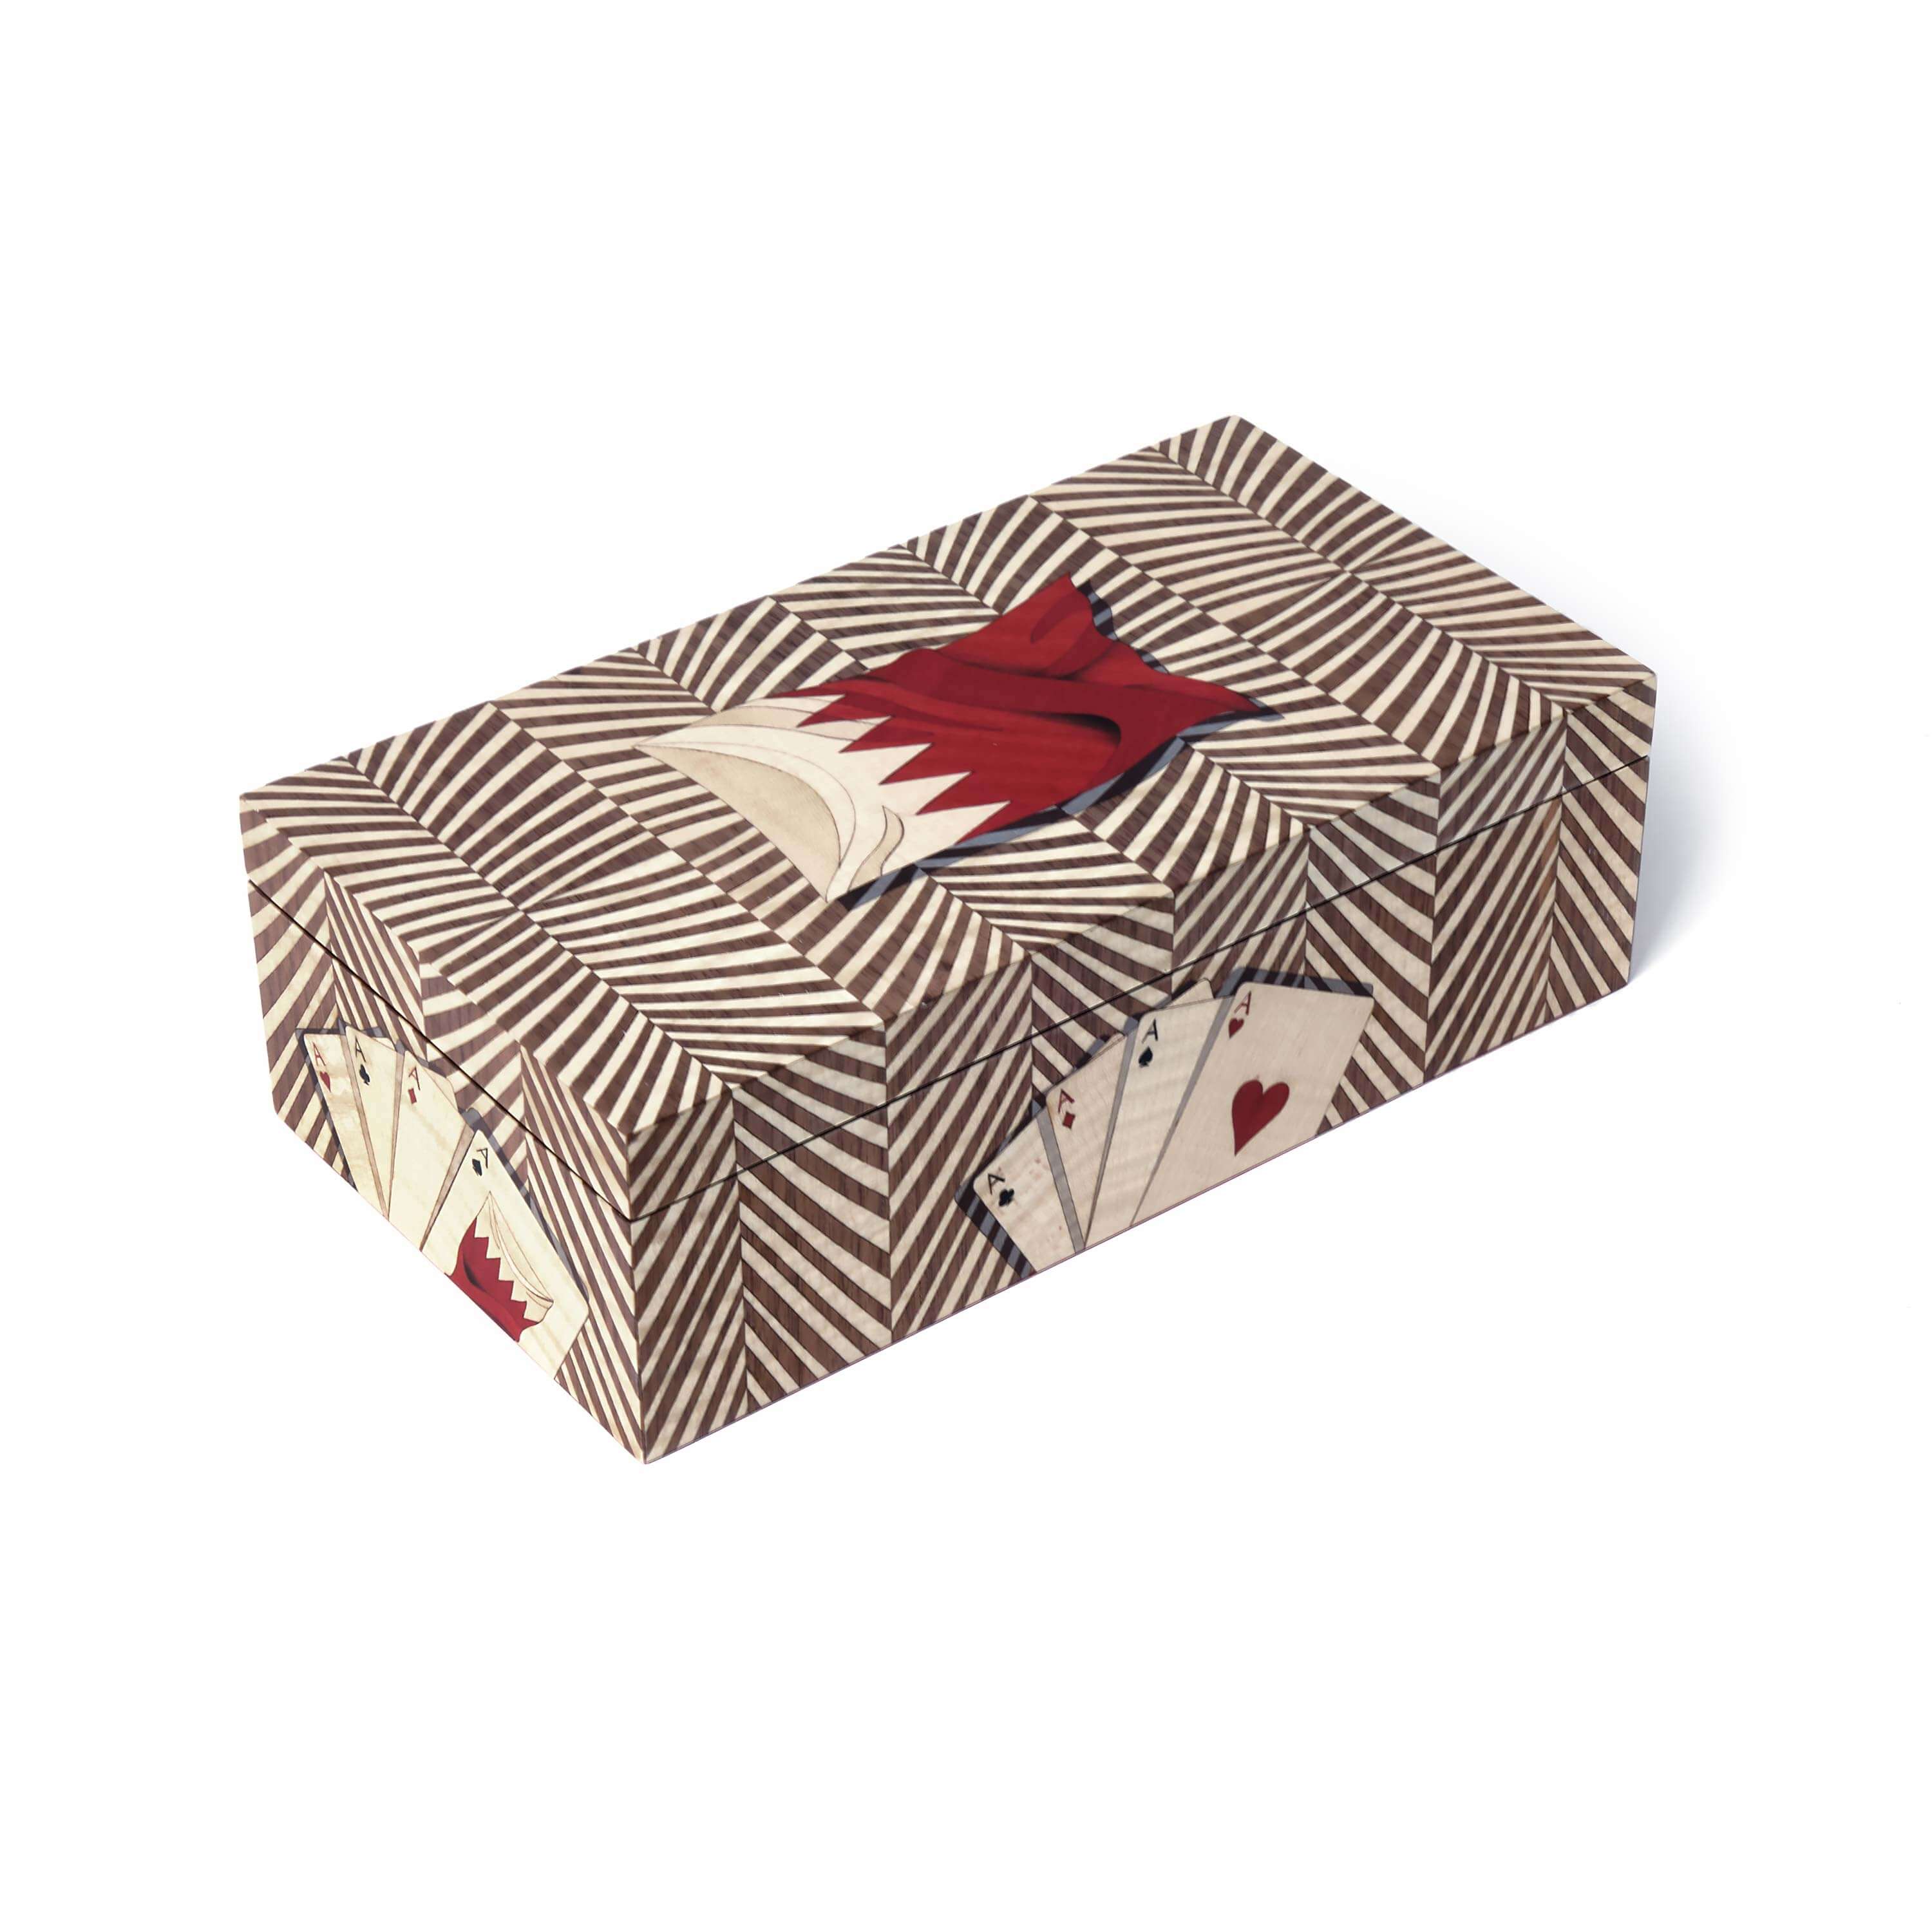 Bespoke red and white marquetry card box design